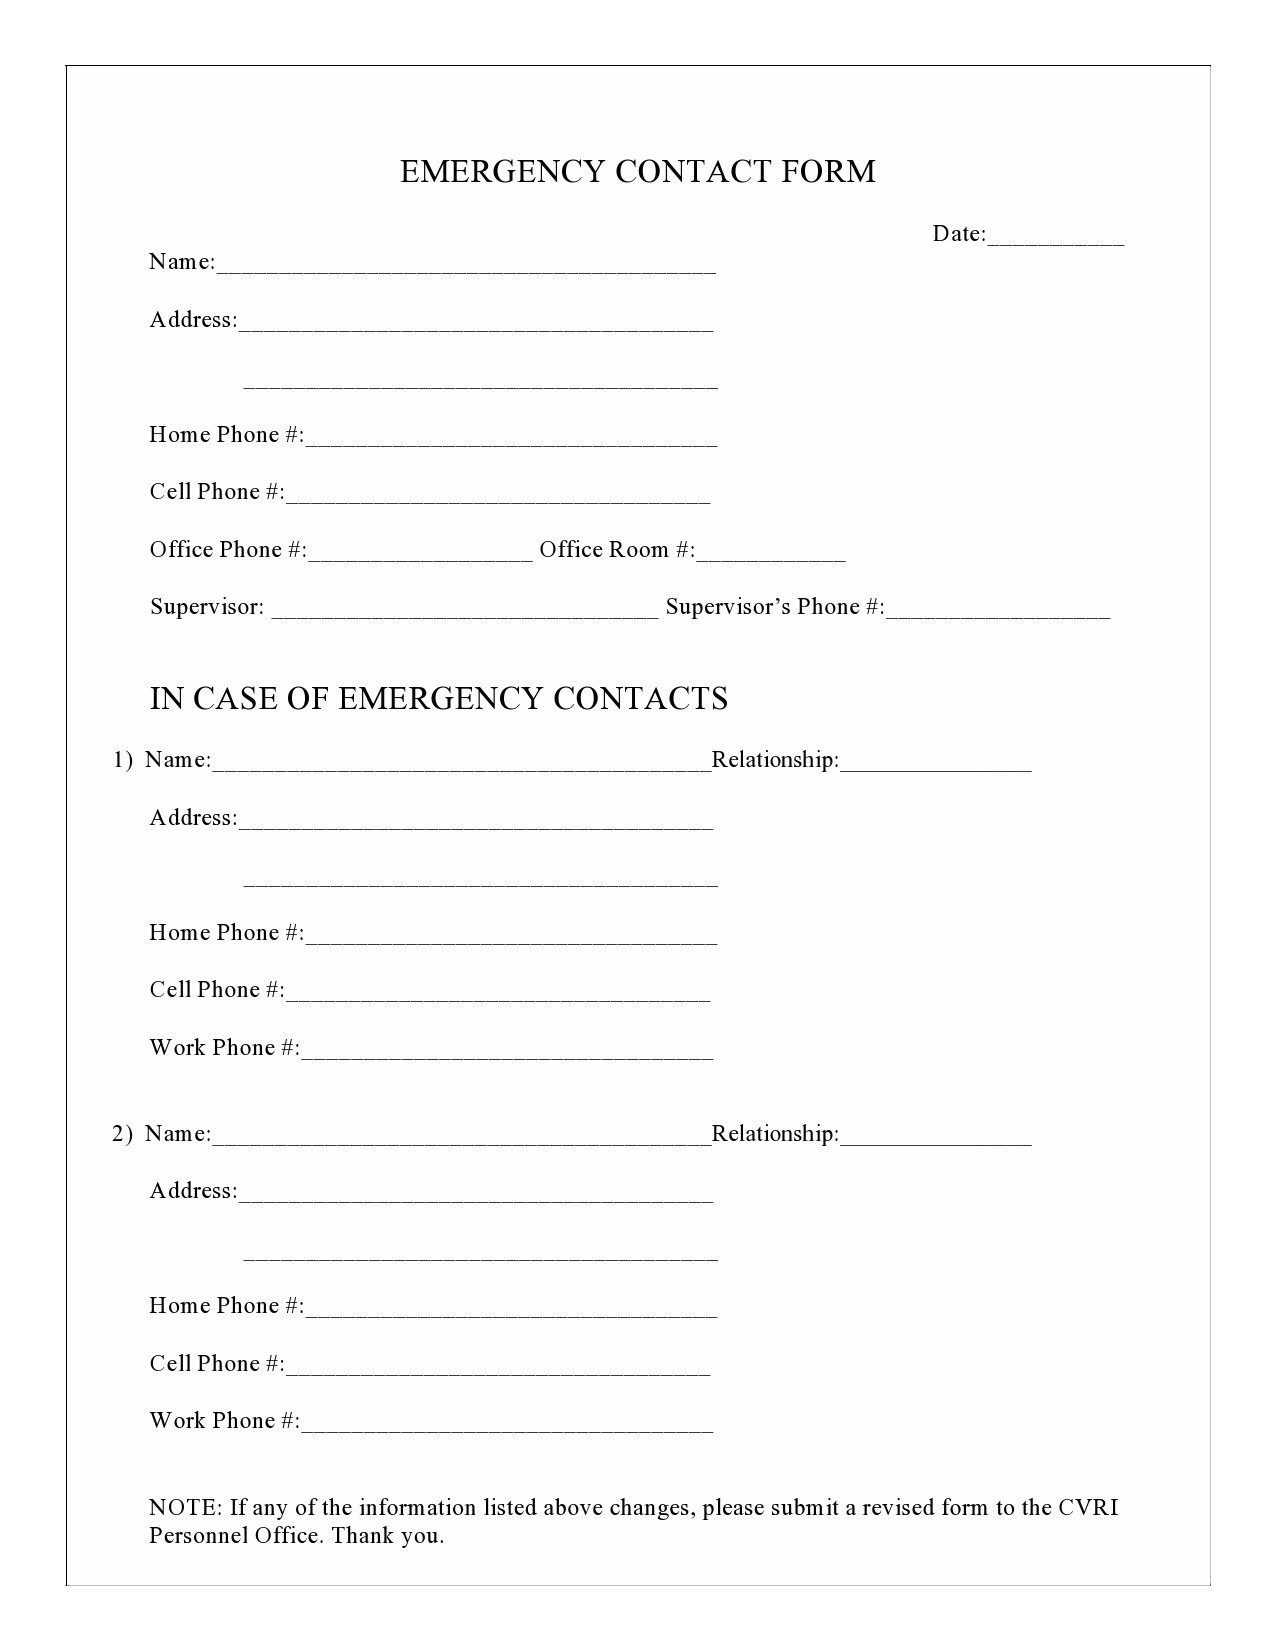 Free emergency contact form 04